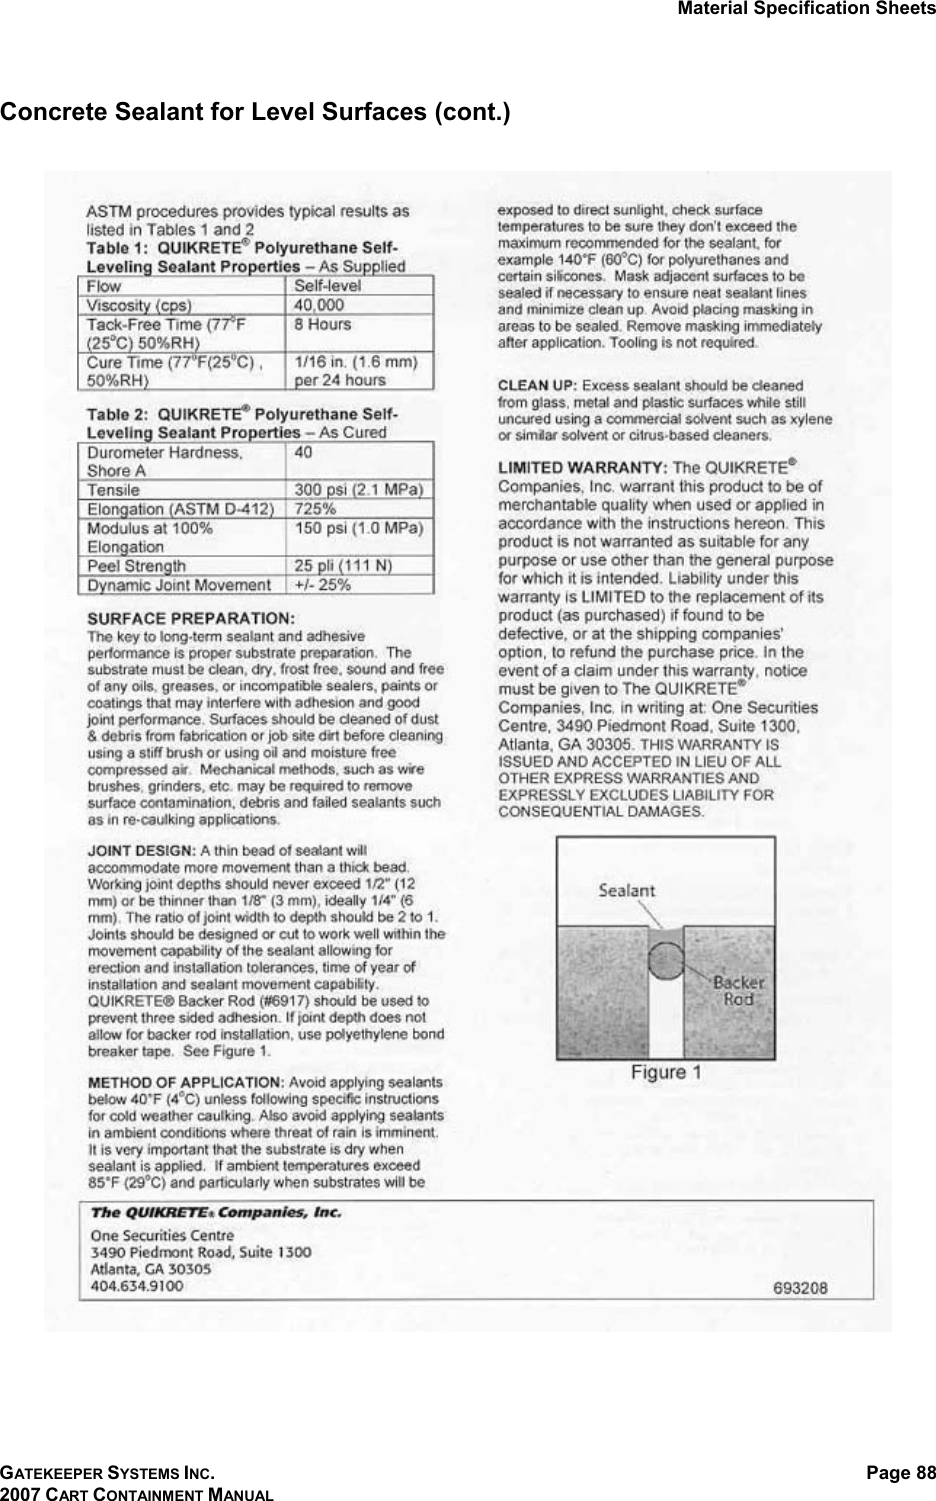 Material Specification Sheets GATEKEEPER SYSTEMS INC. 2007 CART CONTAINMENT MANUAL Page 88  Concrete Sealant for Level Surfaces (cont.)    